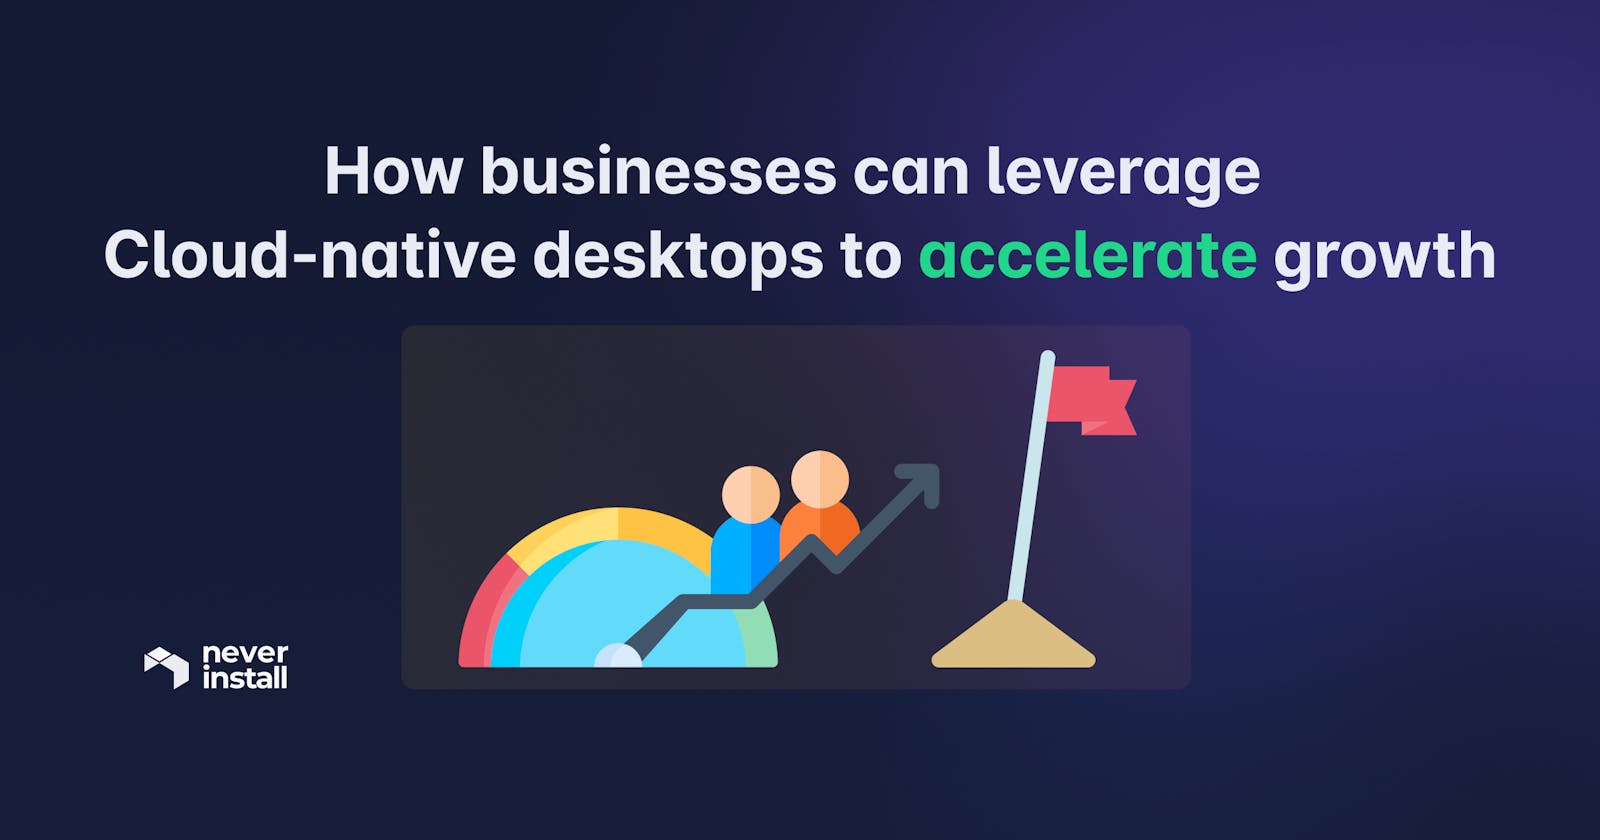 How businesses can leverage Cloud-native desktops to accelerate growth